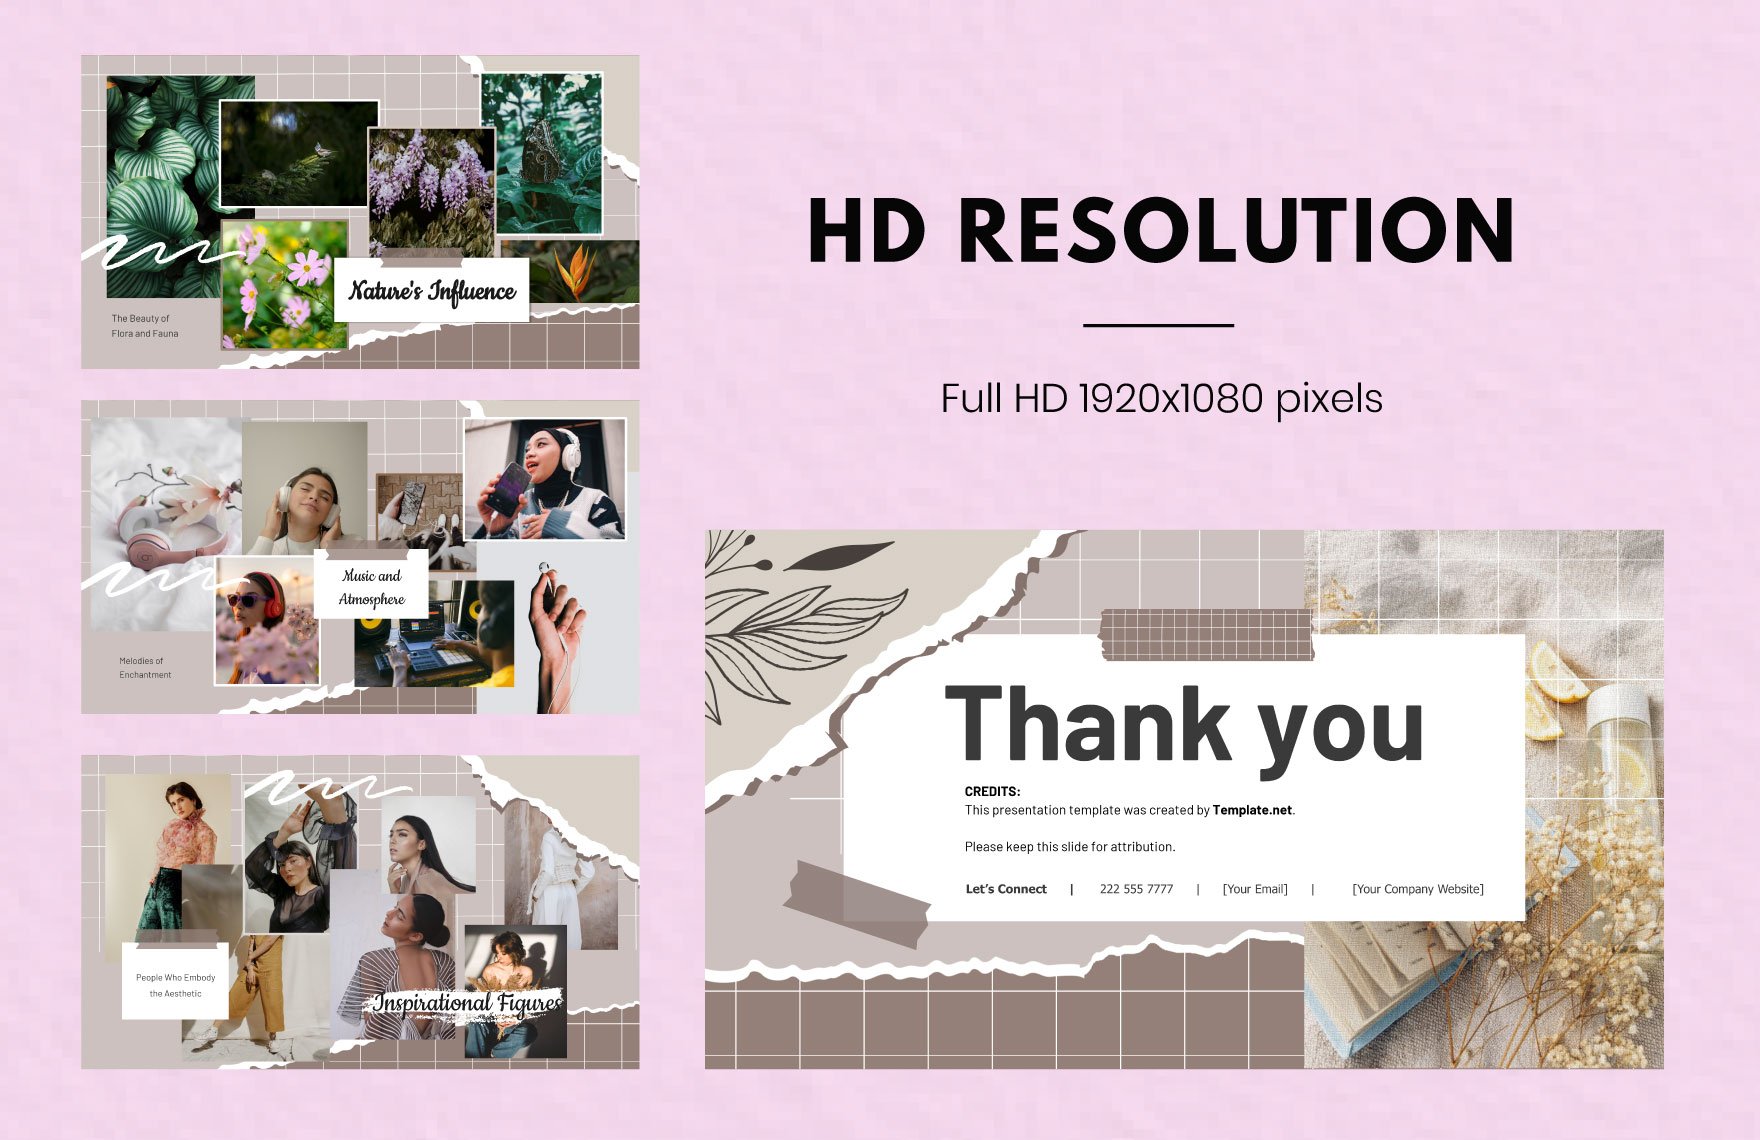 Aesthetic Vision Board Template